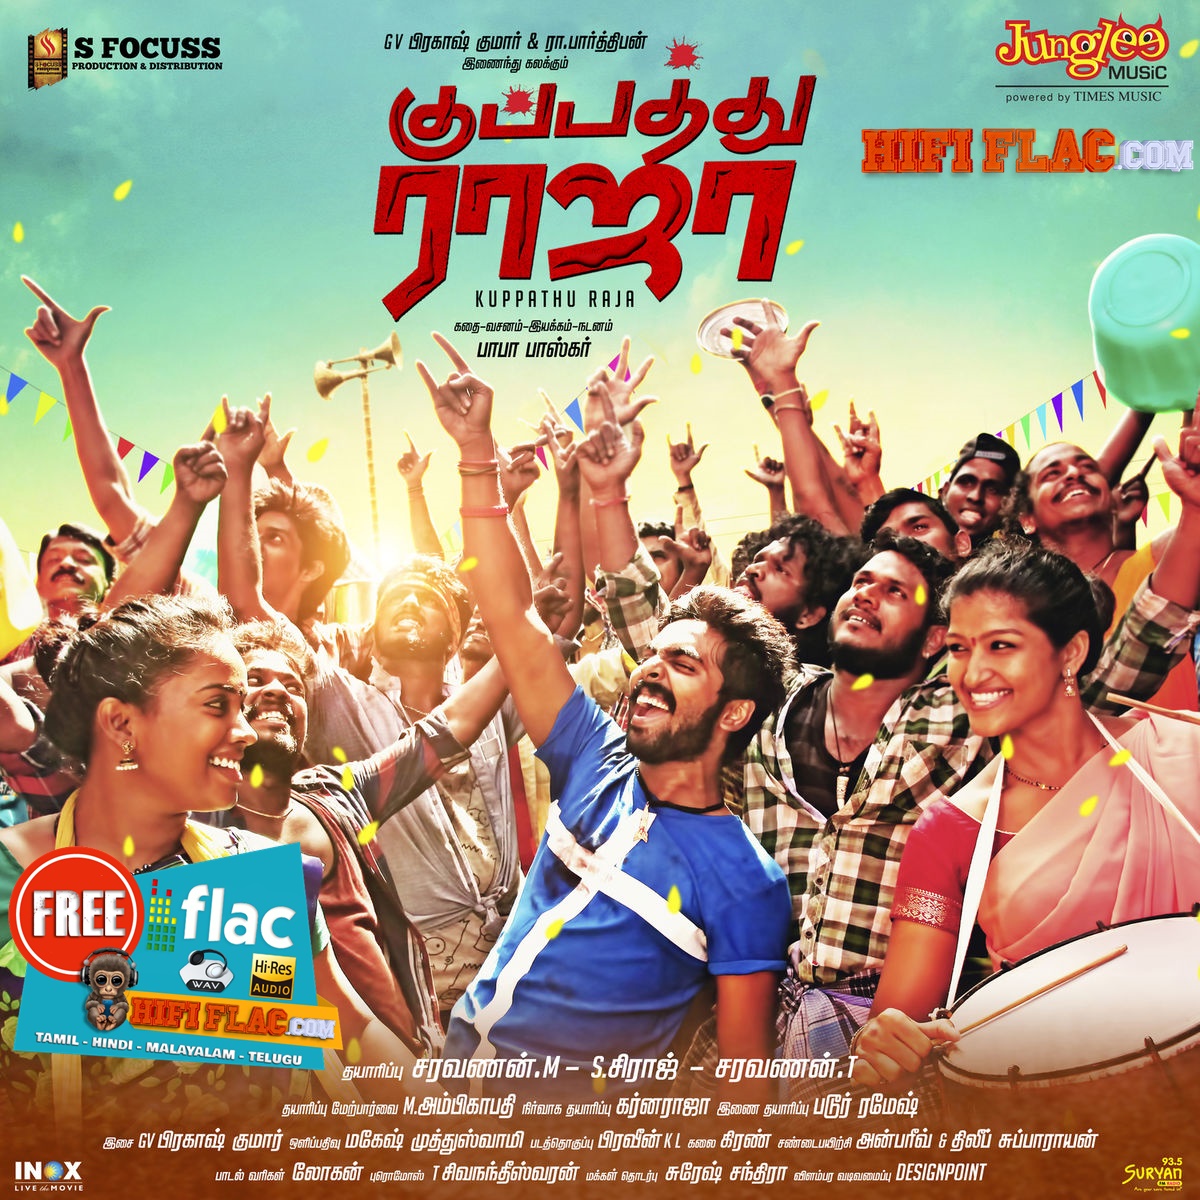 Tamil Mp3 Song Free Download 2019